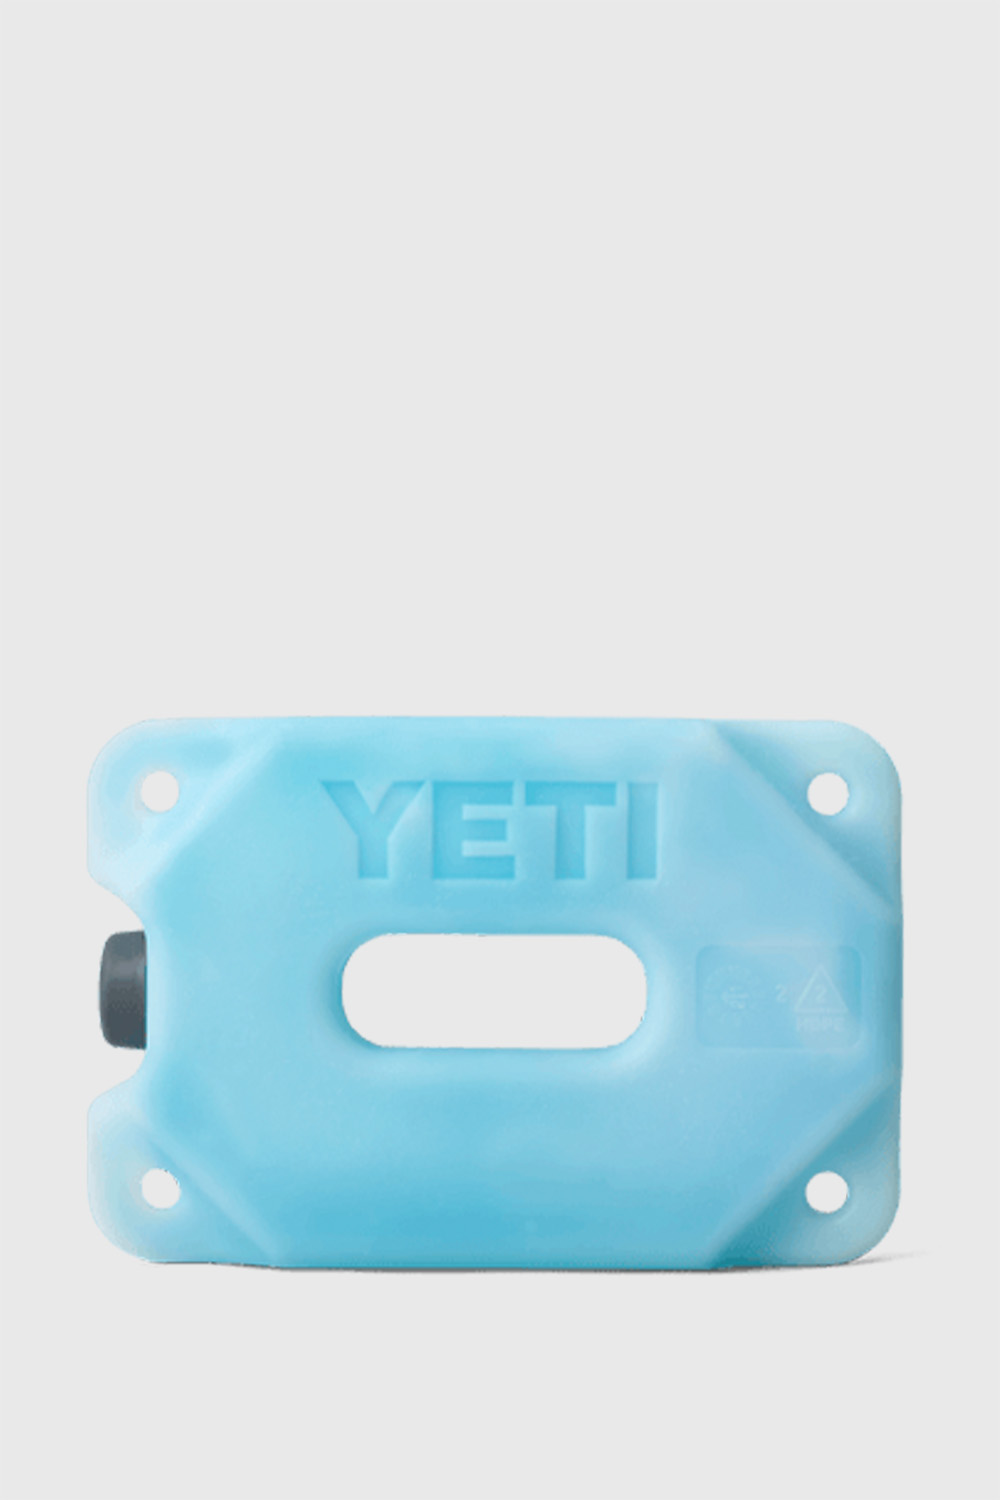 YETI 900 G Ice Pack 70000000063 CLEAR